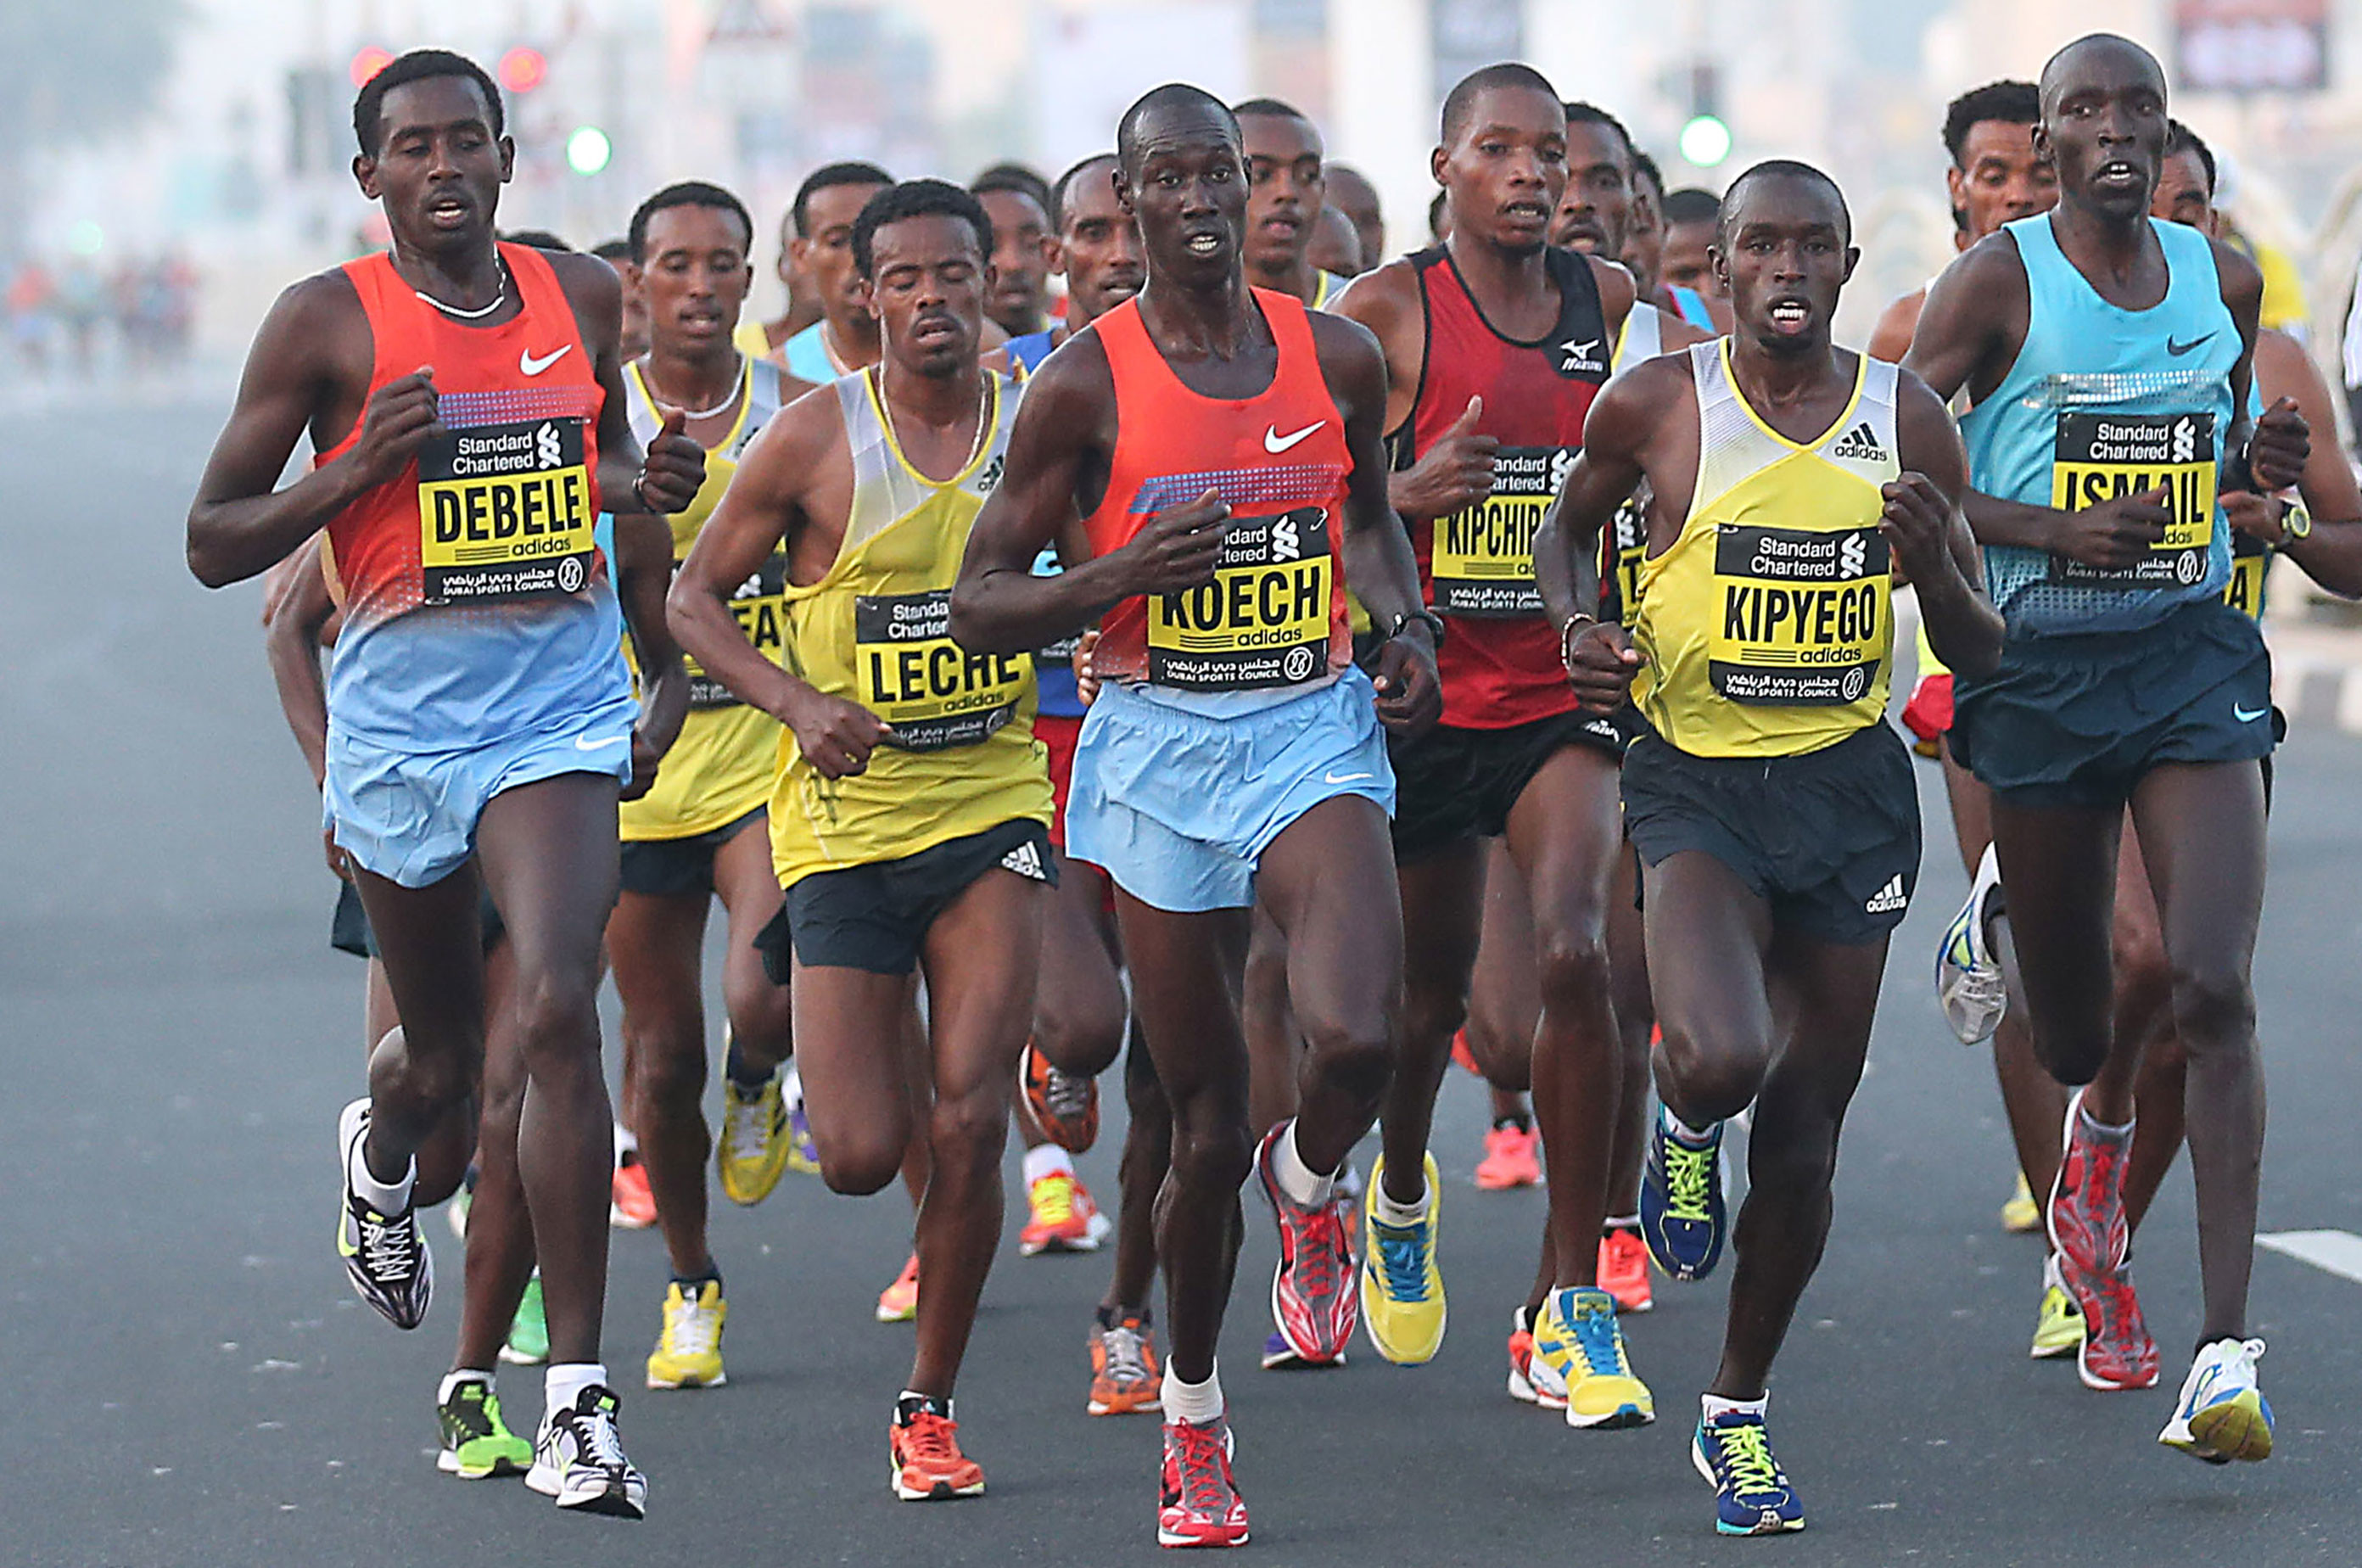 Kenyan runners call for Athletics Kenya to provide services to help athletes